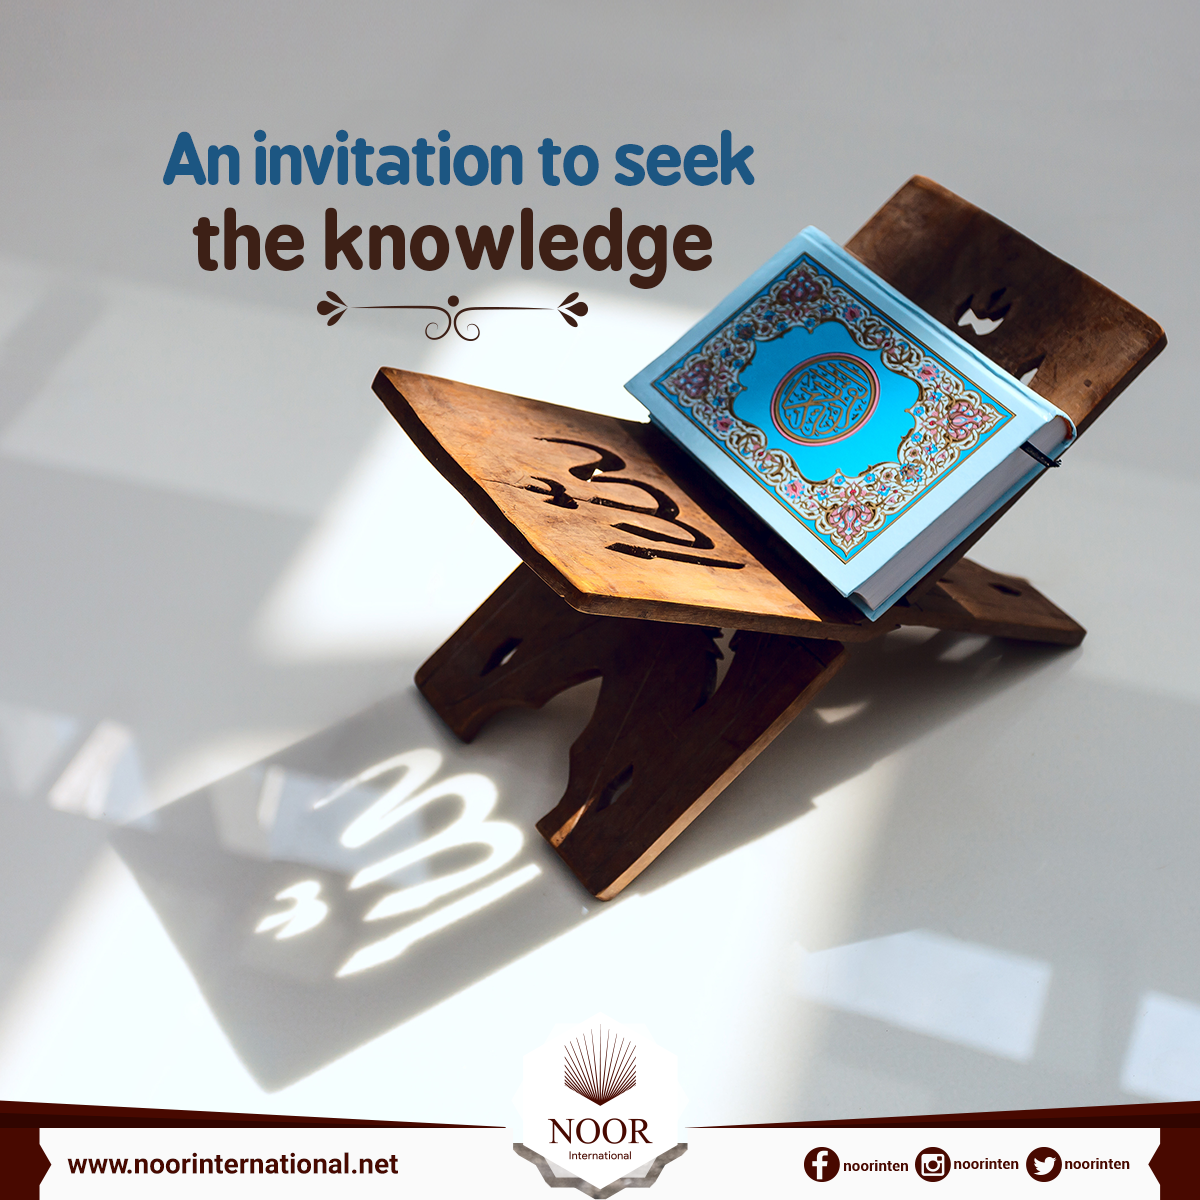 An invitation to seek the knowledge